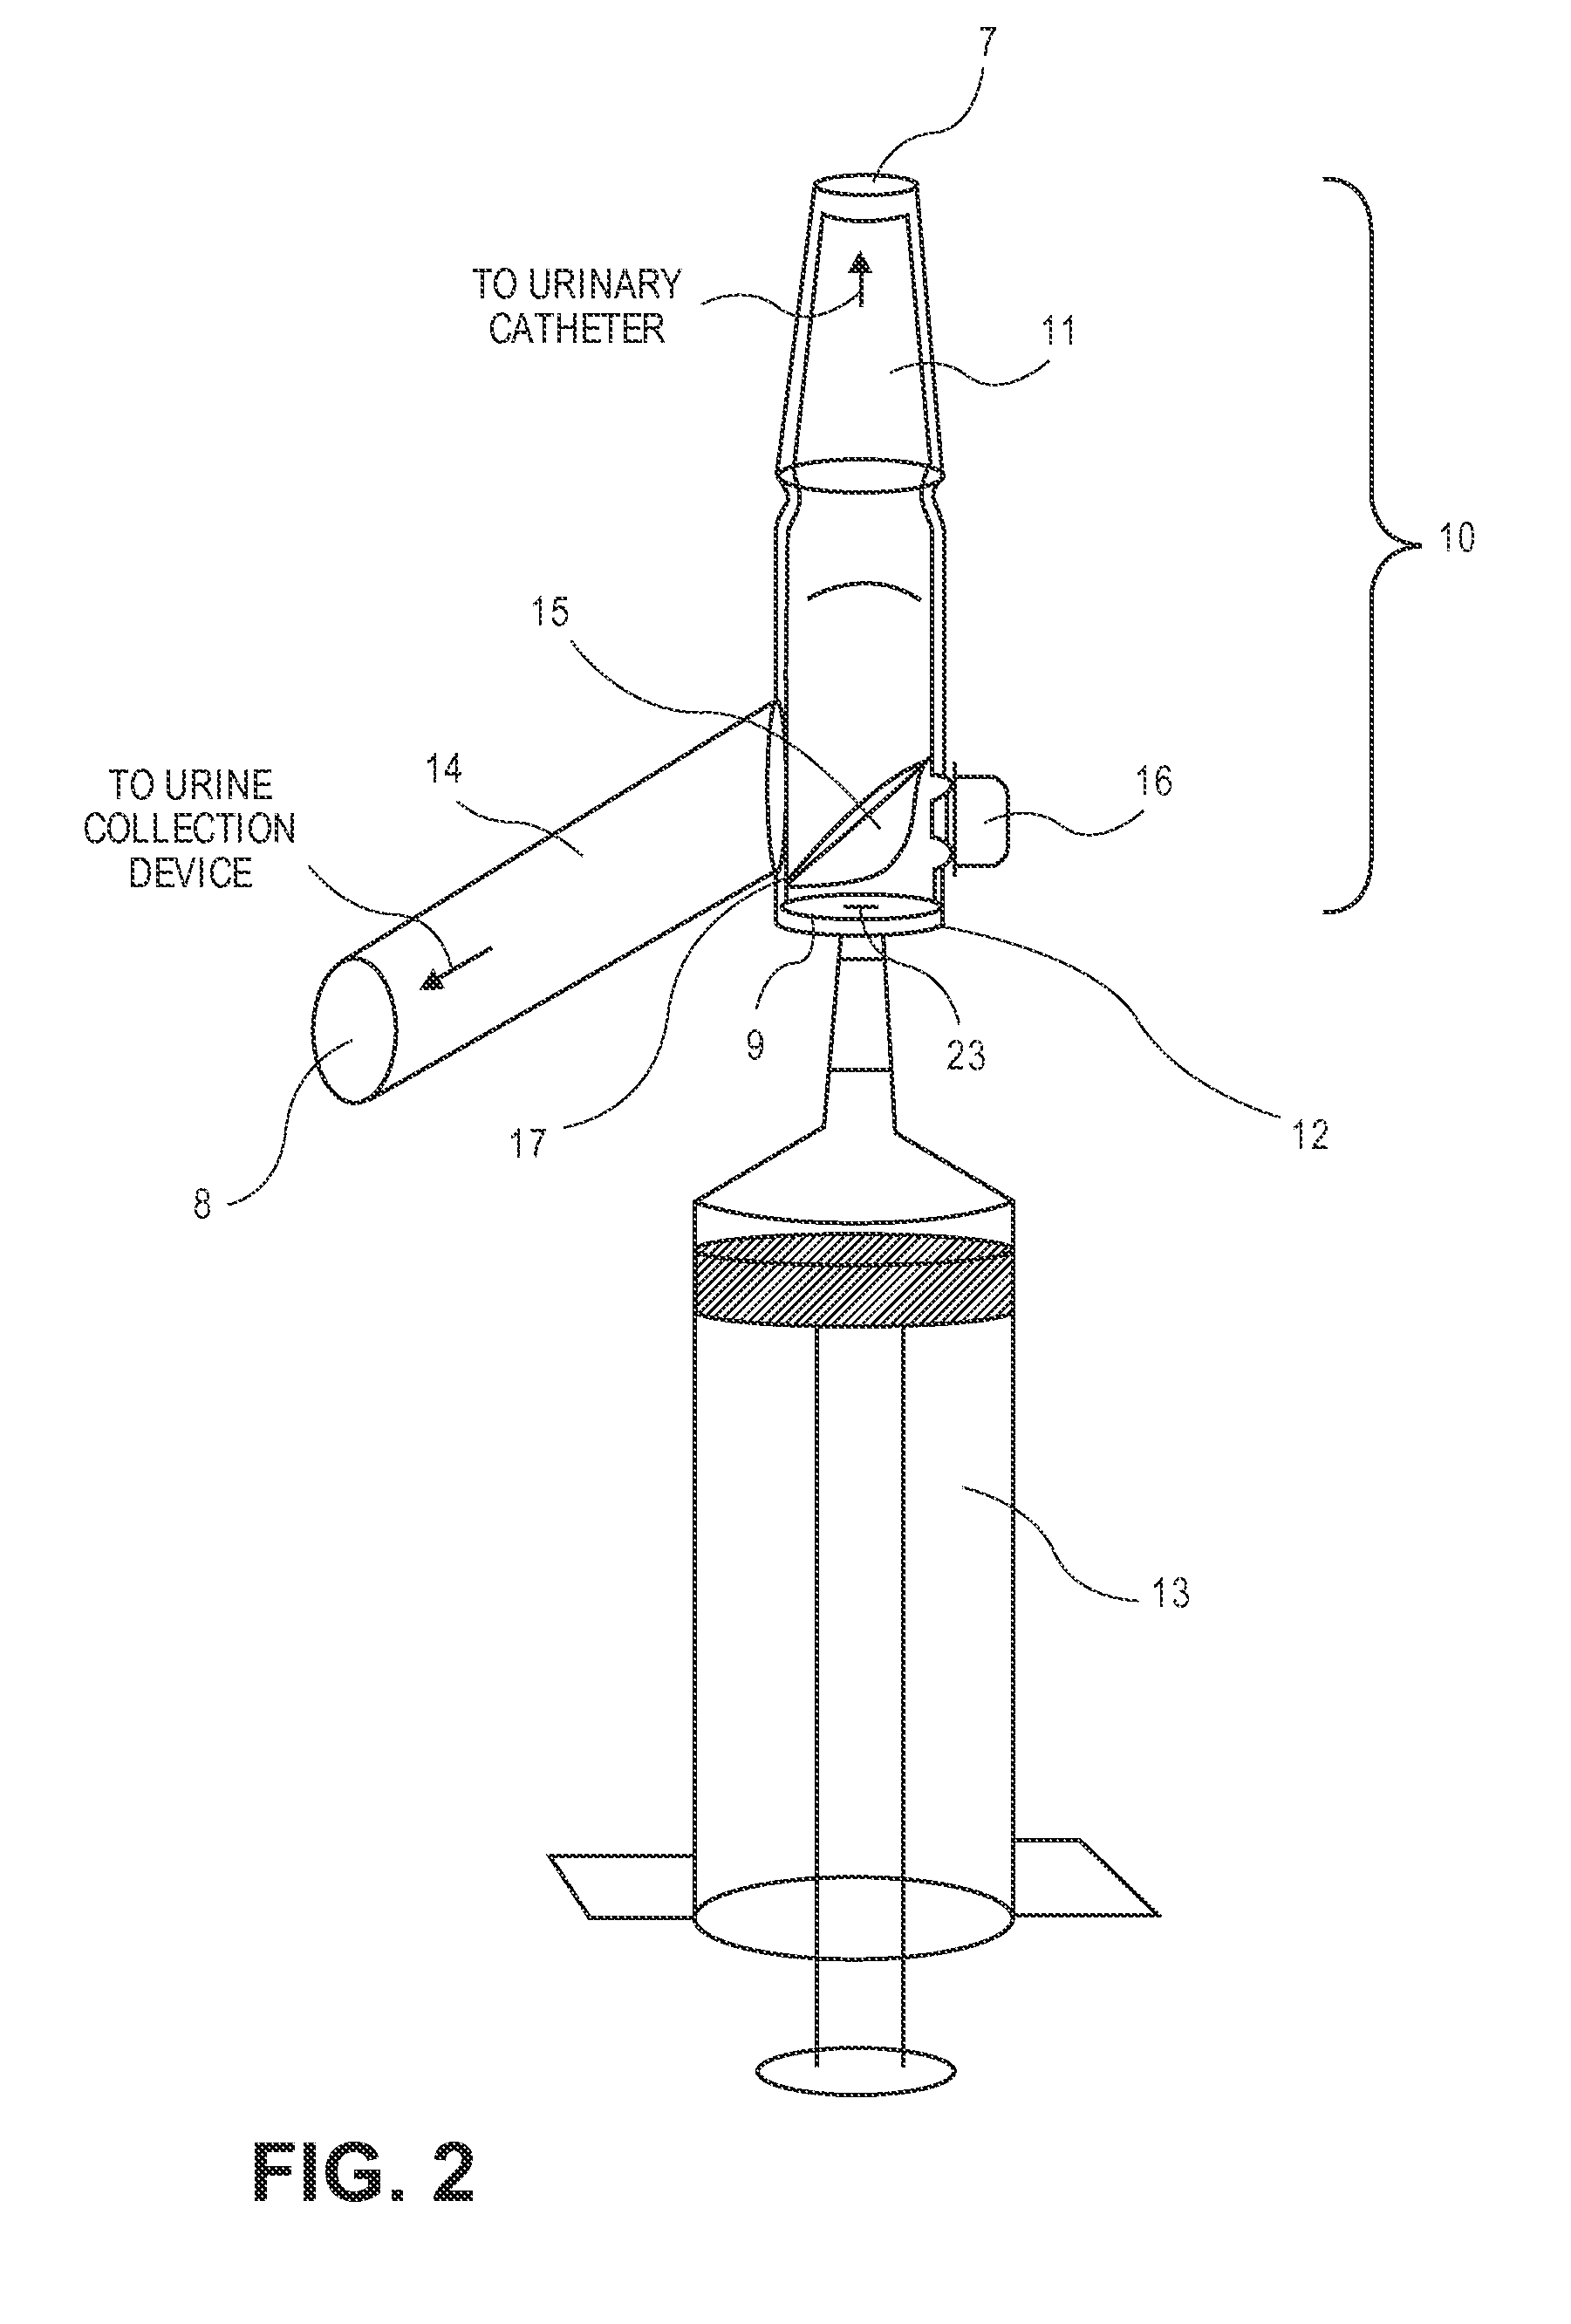 Methods and Devices for Aseptic Irrigation, Urine Sampling, and Flow Control of Urine from a Catheterized Bladder